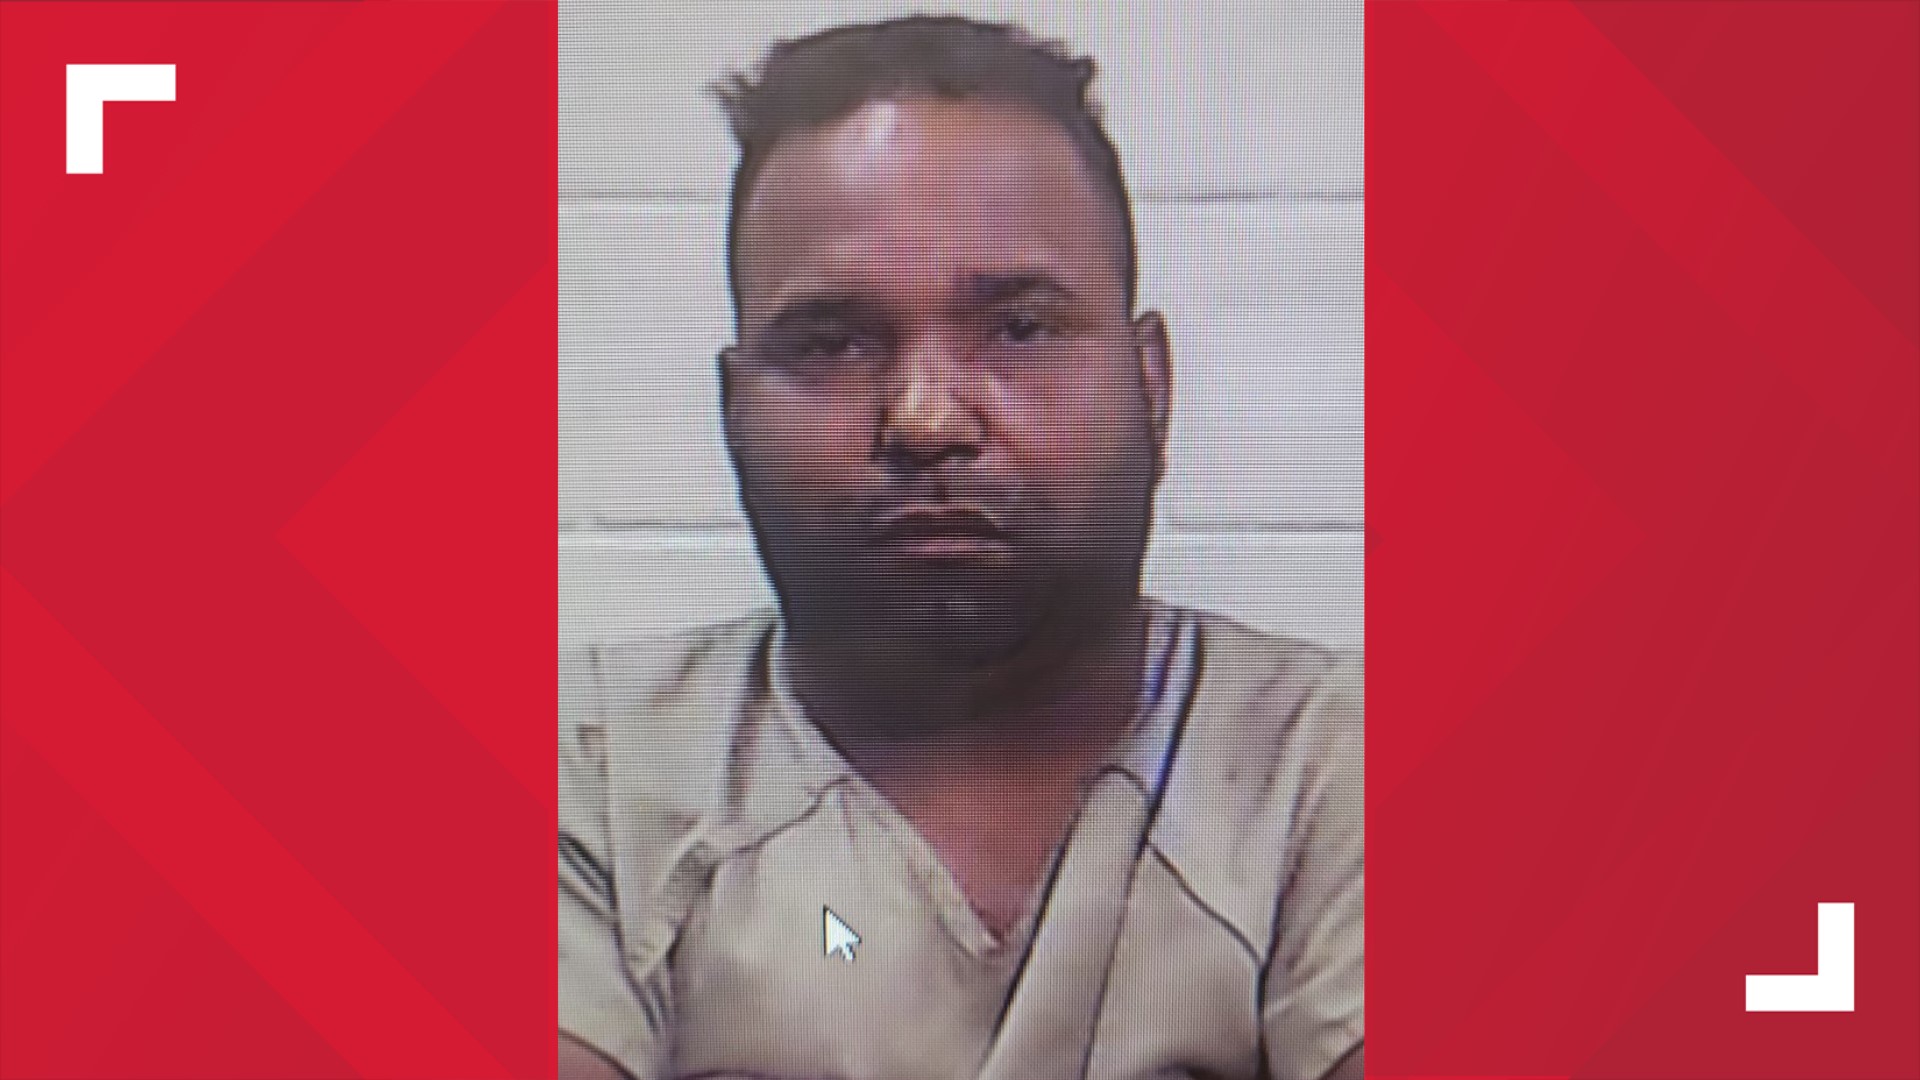 Javier Martinez Arias, 37, is now charged with three counts of aggravated kidnapping and one count of aggravated sexual assault.